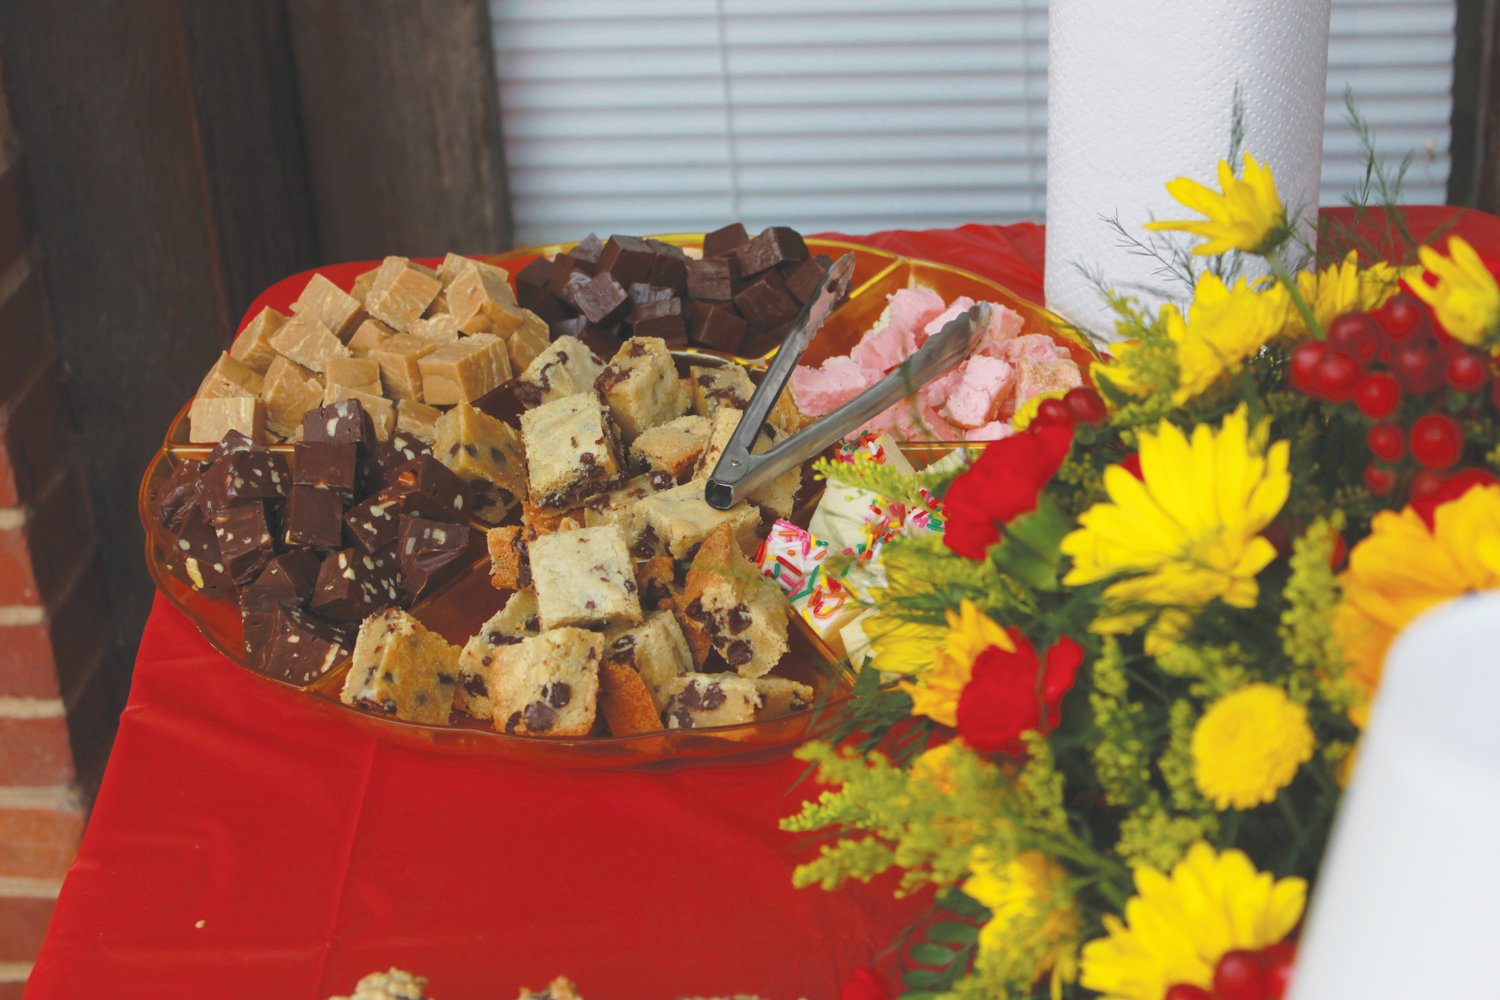 Samples of fudge lay on a table for cutomers to try during the Down Town Cafe official ribbon cutting ceremony on Thursday in downtown Siler City. The flavors of fudge included sugar cookie, chocolate pecan, strawberry shortcake and more..